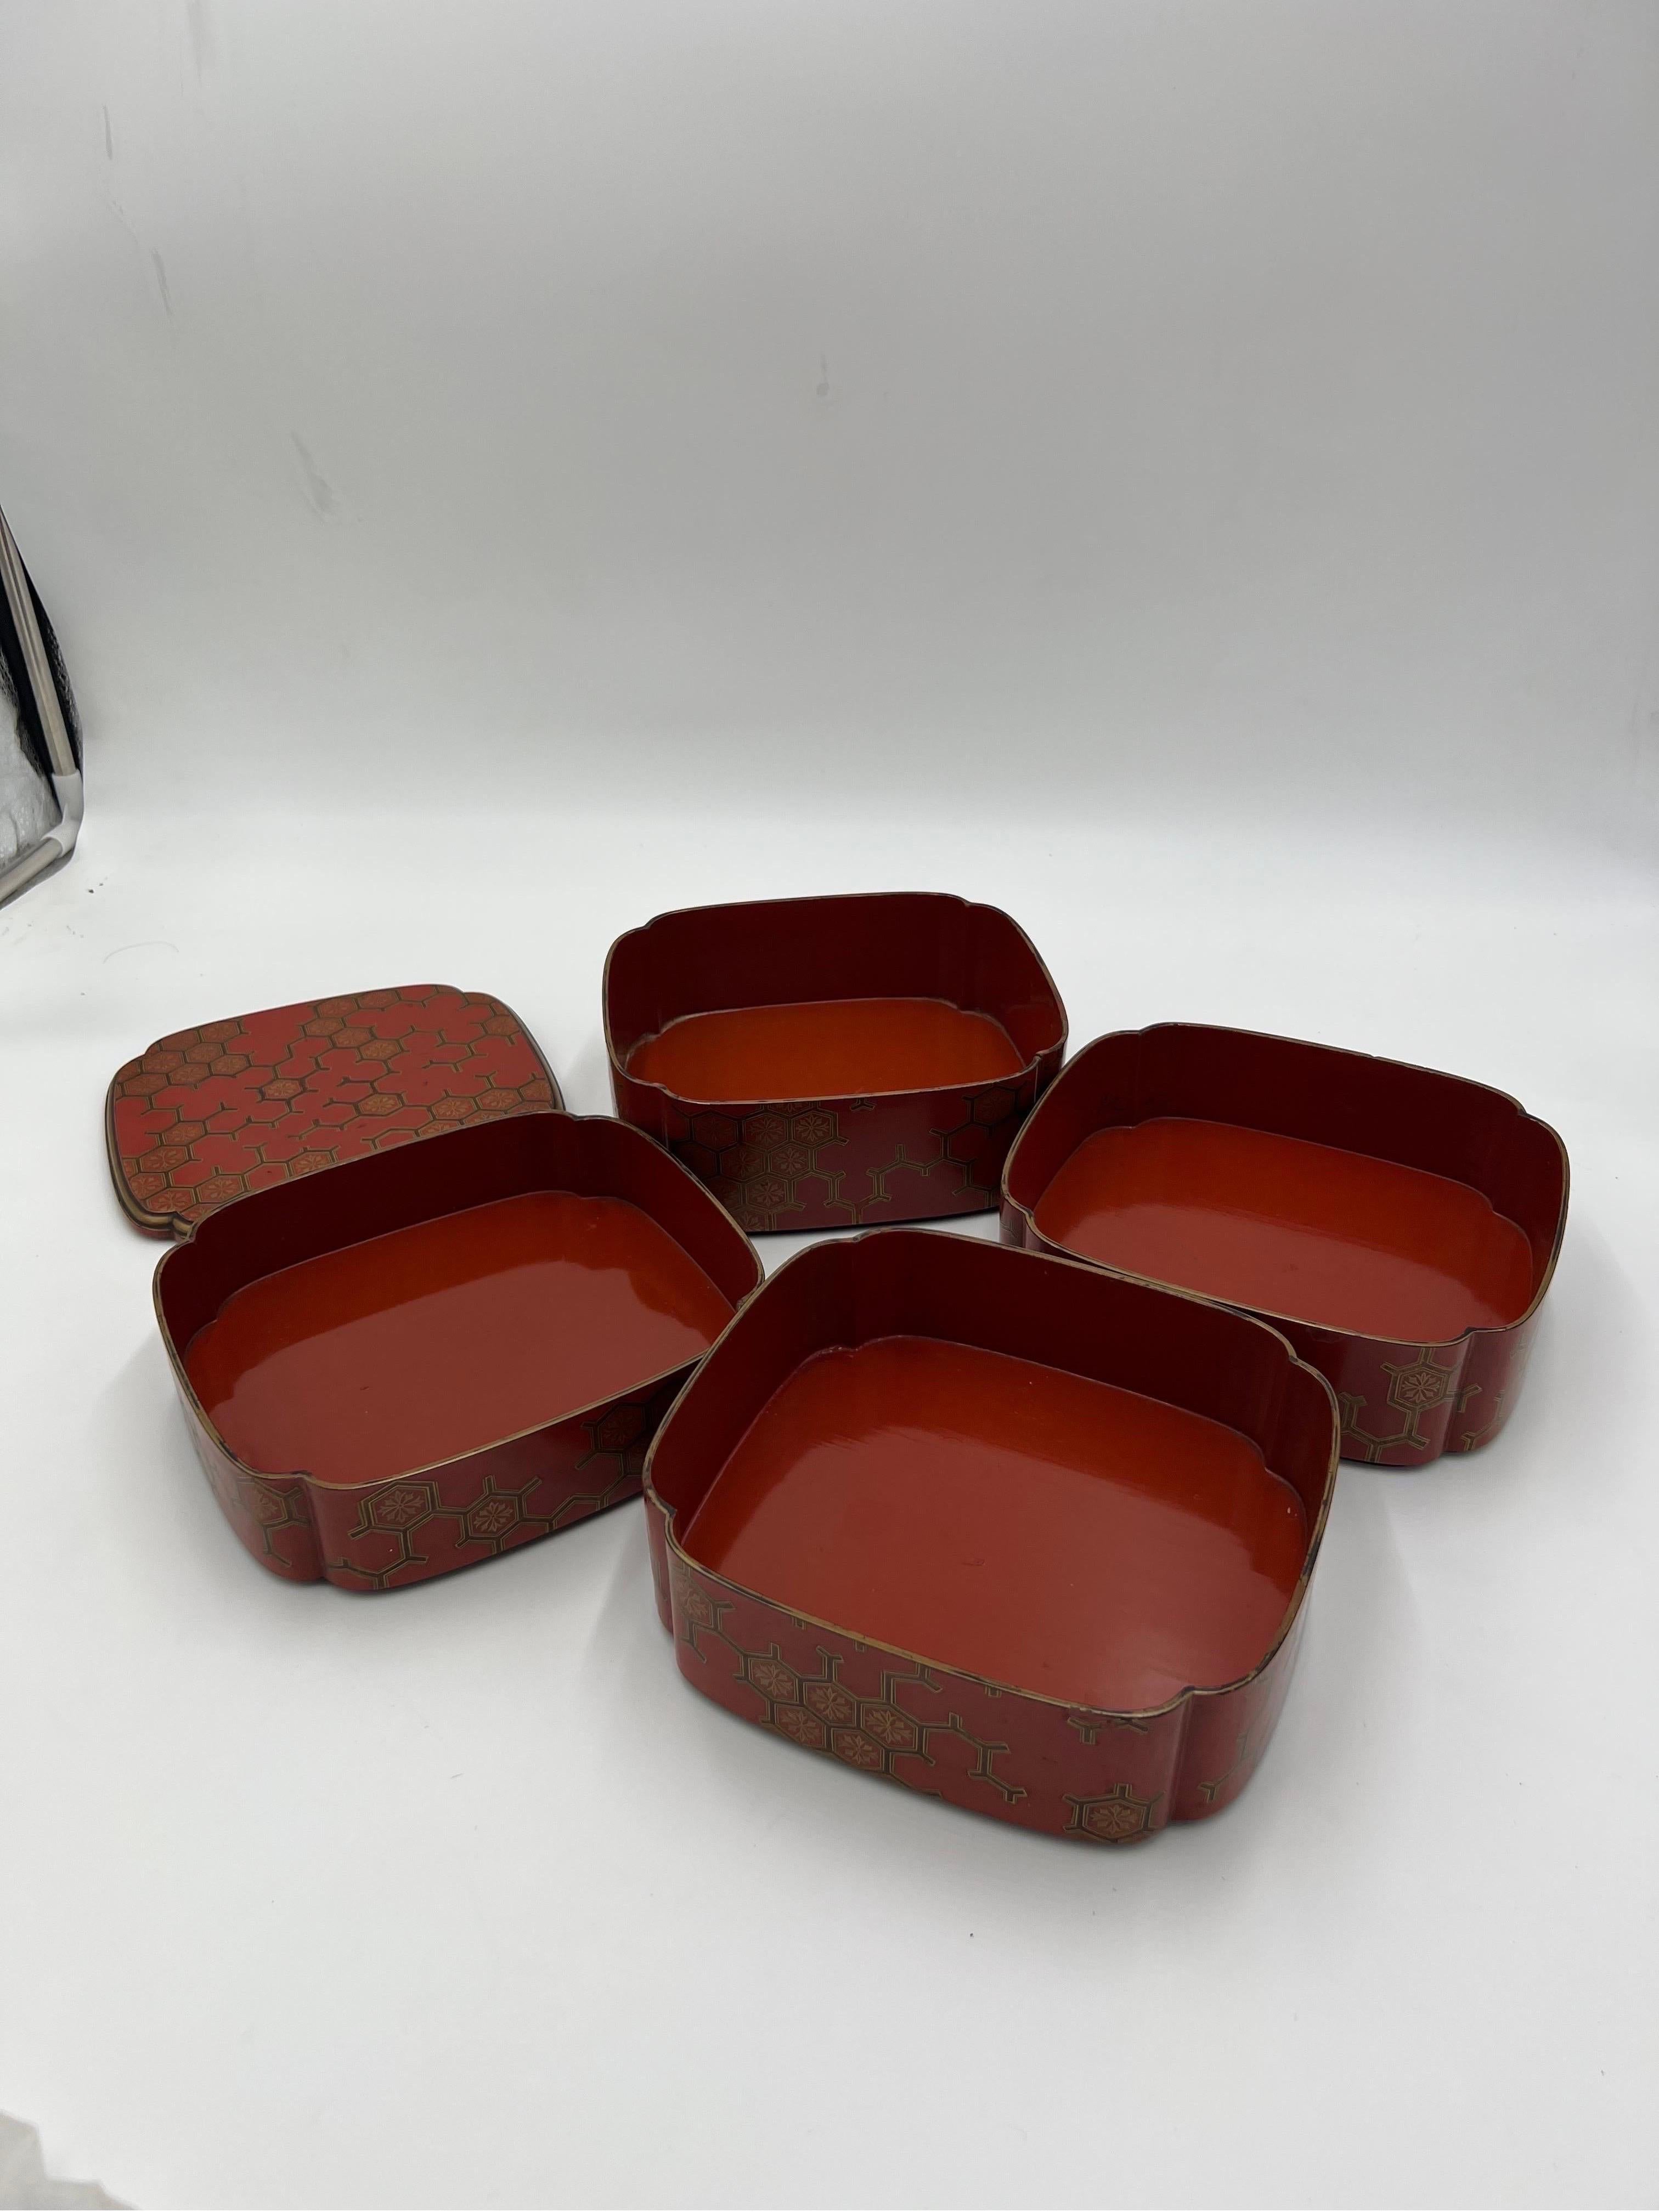 Antique Japanese Jubako 4-Tiered Bento Red Lacquerware Box For Sale 2